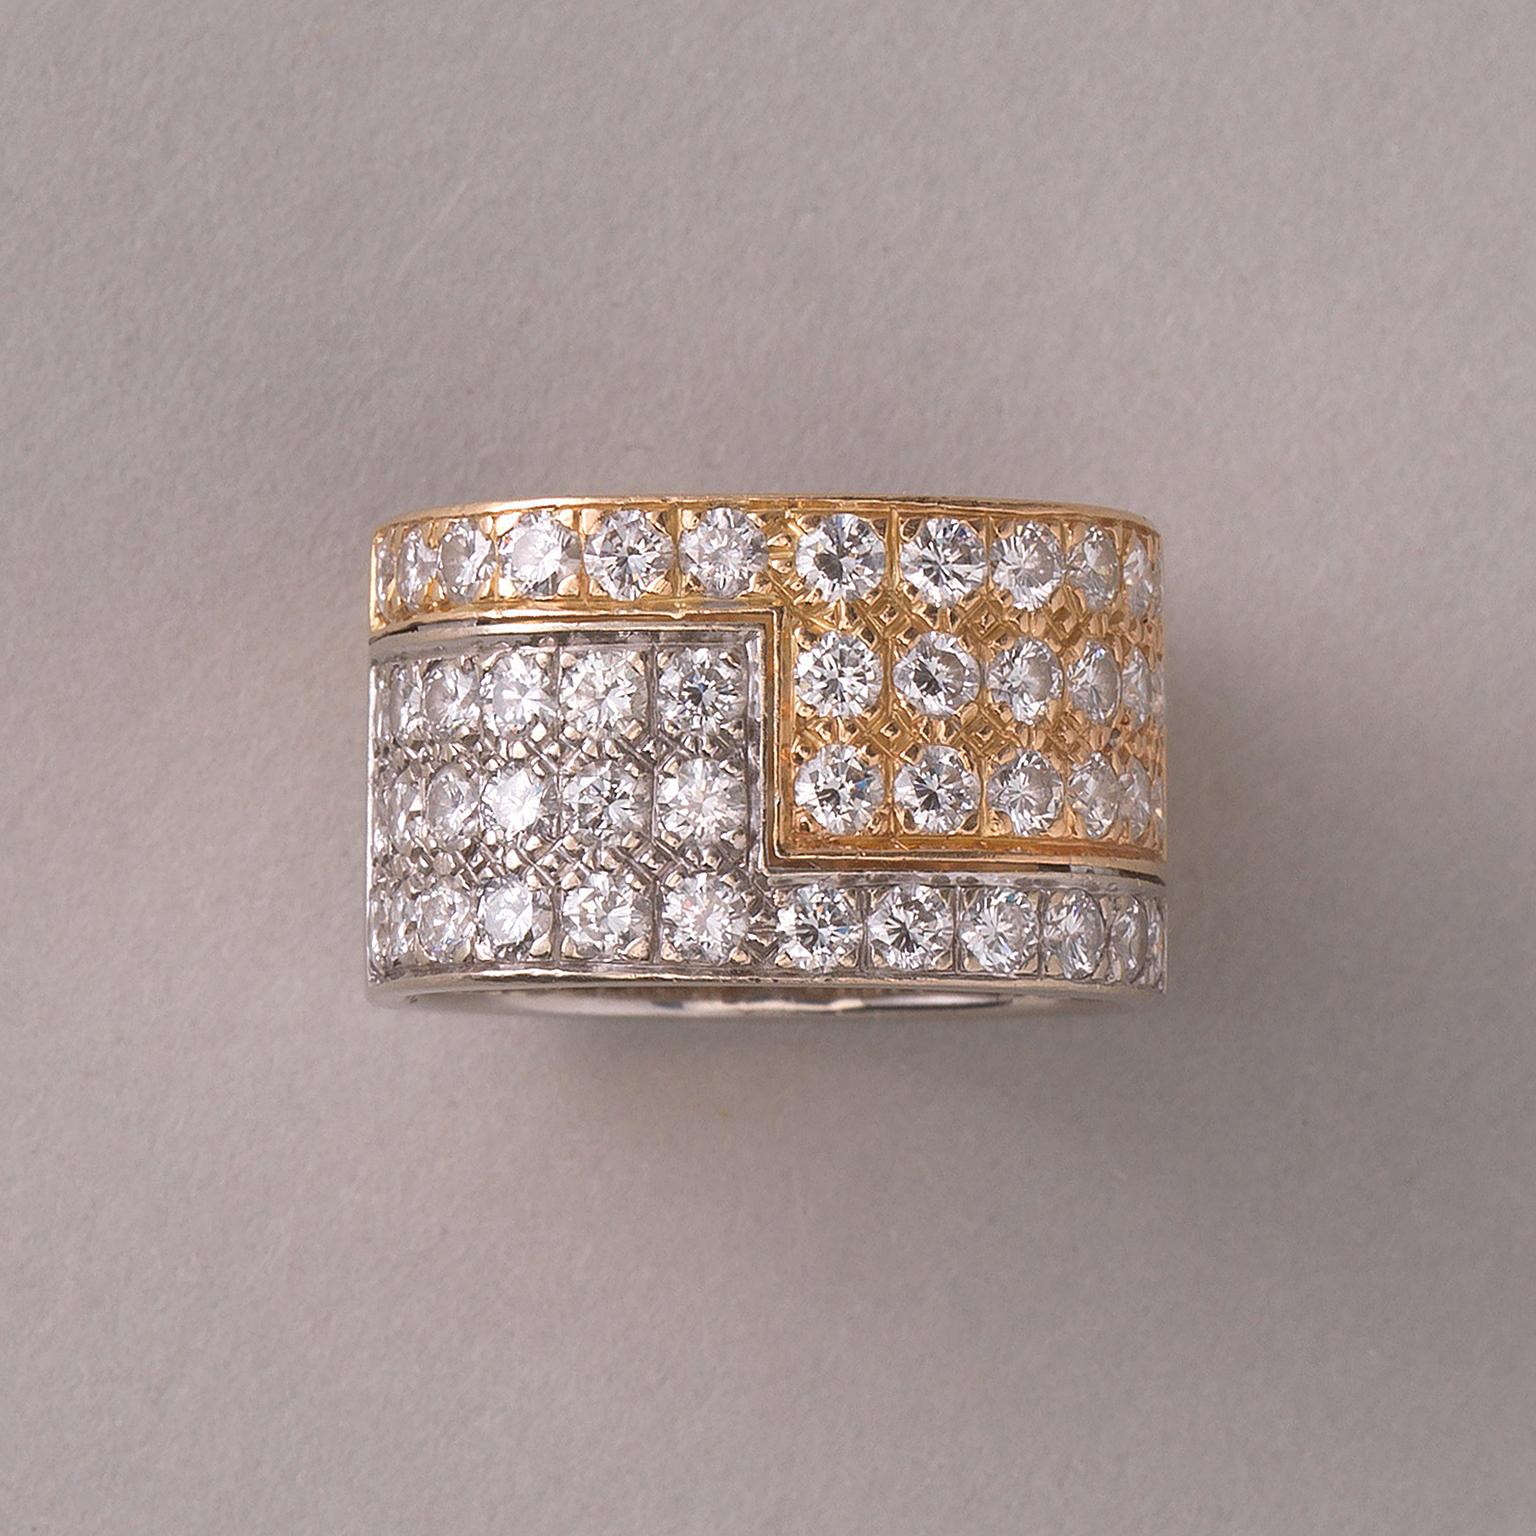 An 18 carat bi-color gold wide band ring with a yellow and white gold juxtaposed angle pavé set with 48 brilliant cut diamonds (app. 2.5 carat, G, VVS2) superbly designed and meticulously fabricated by the Swiss master jeweller Paul Binder, circa